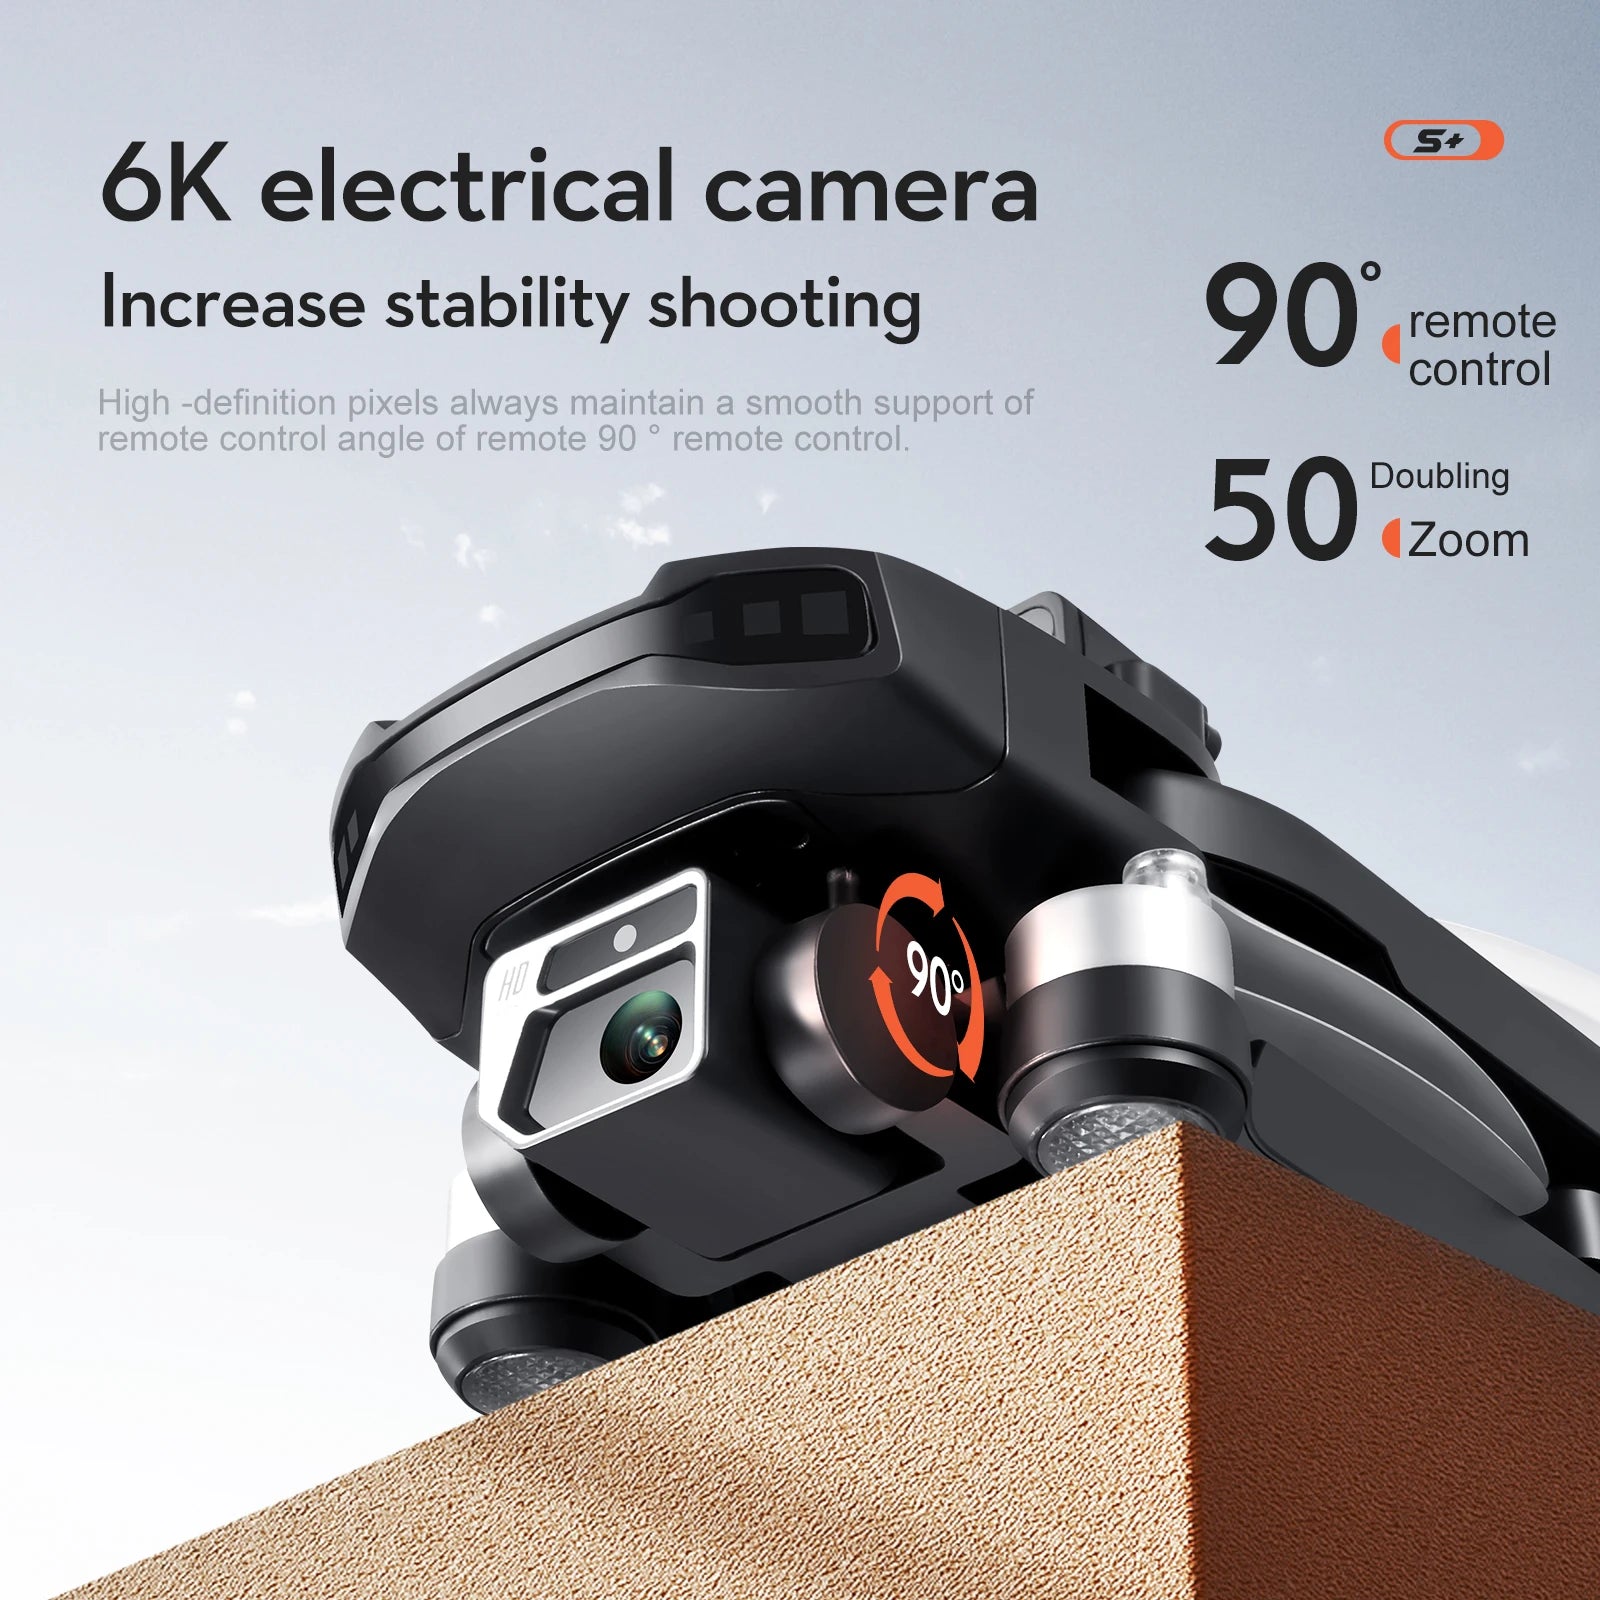 S+ Drone, S+ 6K electrical camera Increase stability shooting 90 remote control High definition pixels